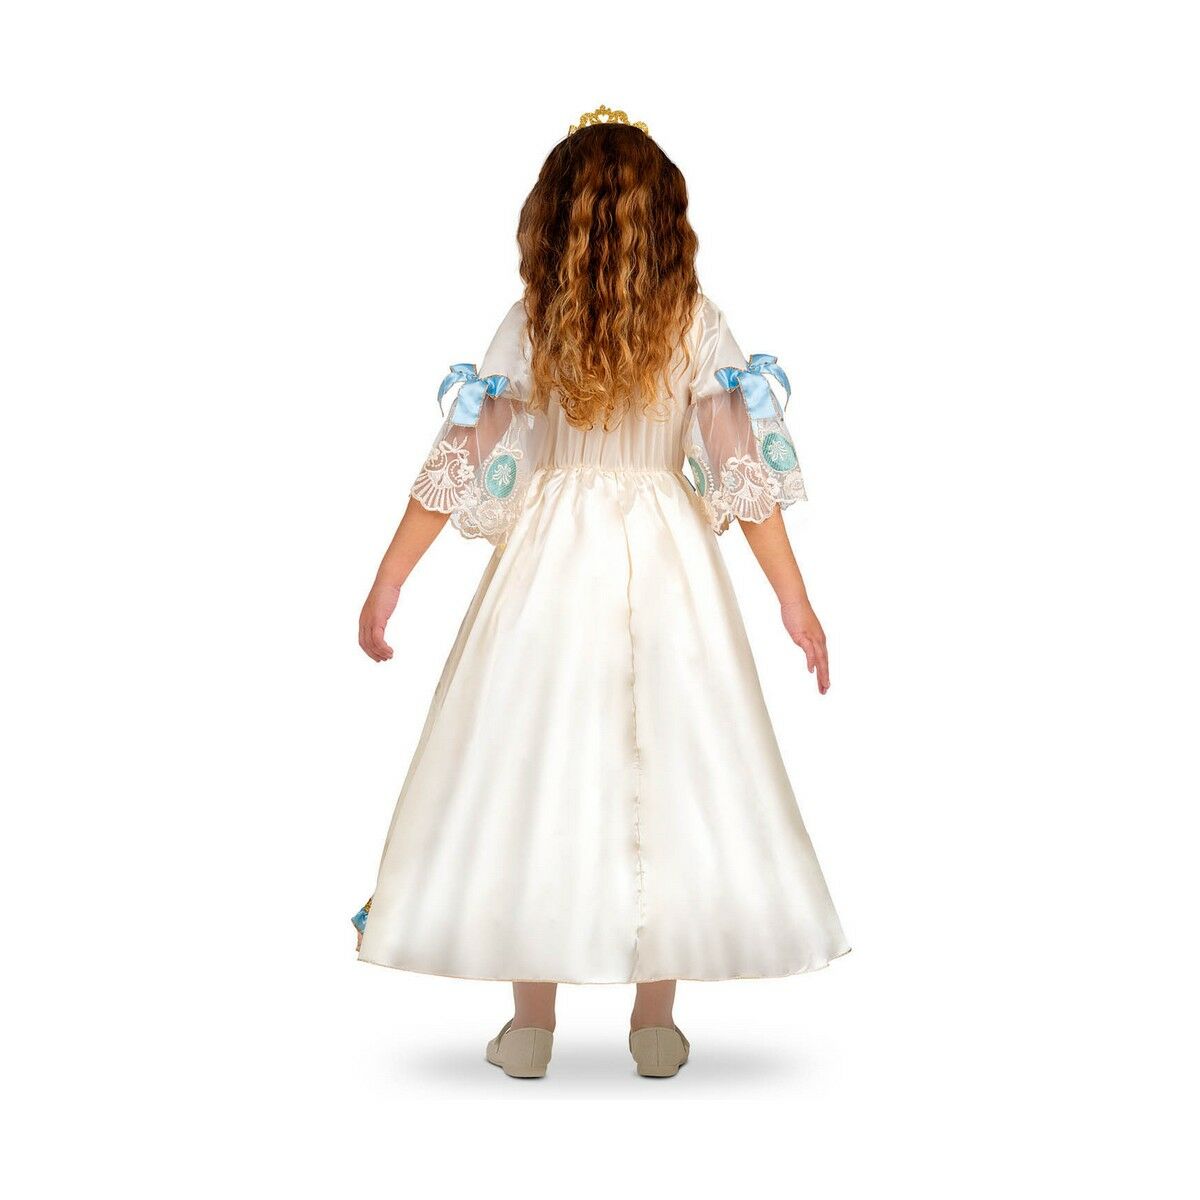 Costume for Children My Other Me Romantic Princess